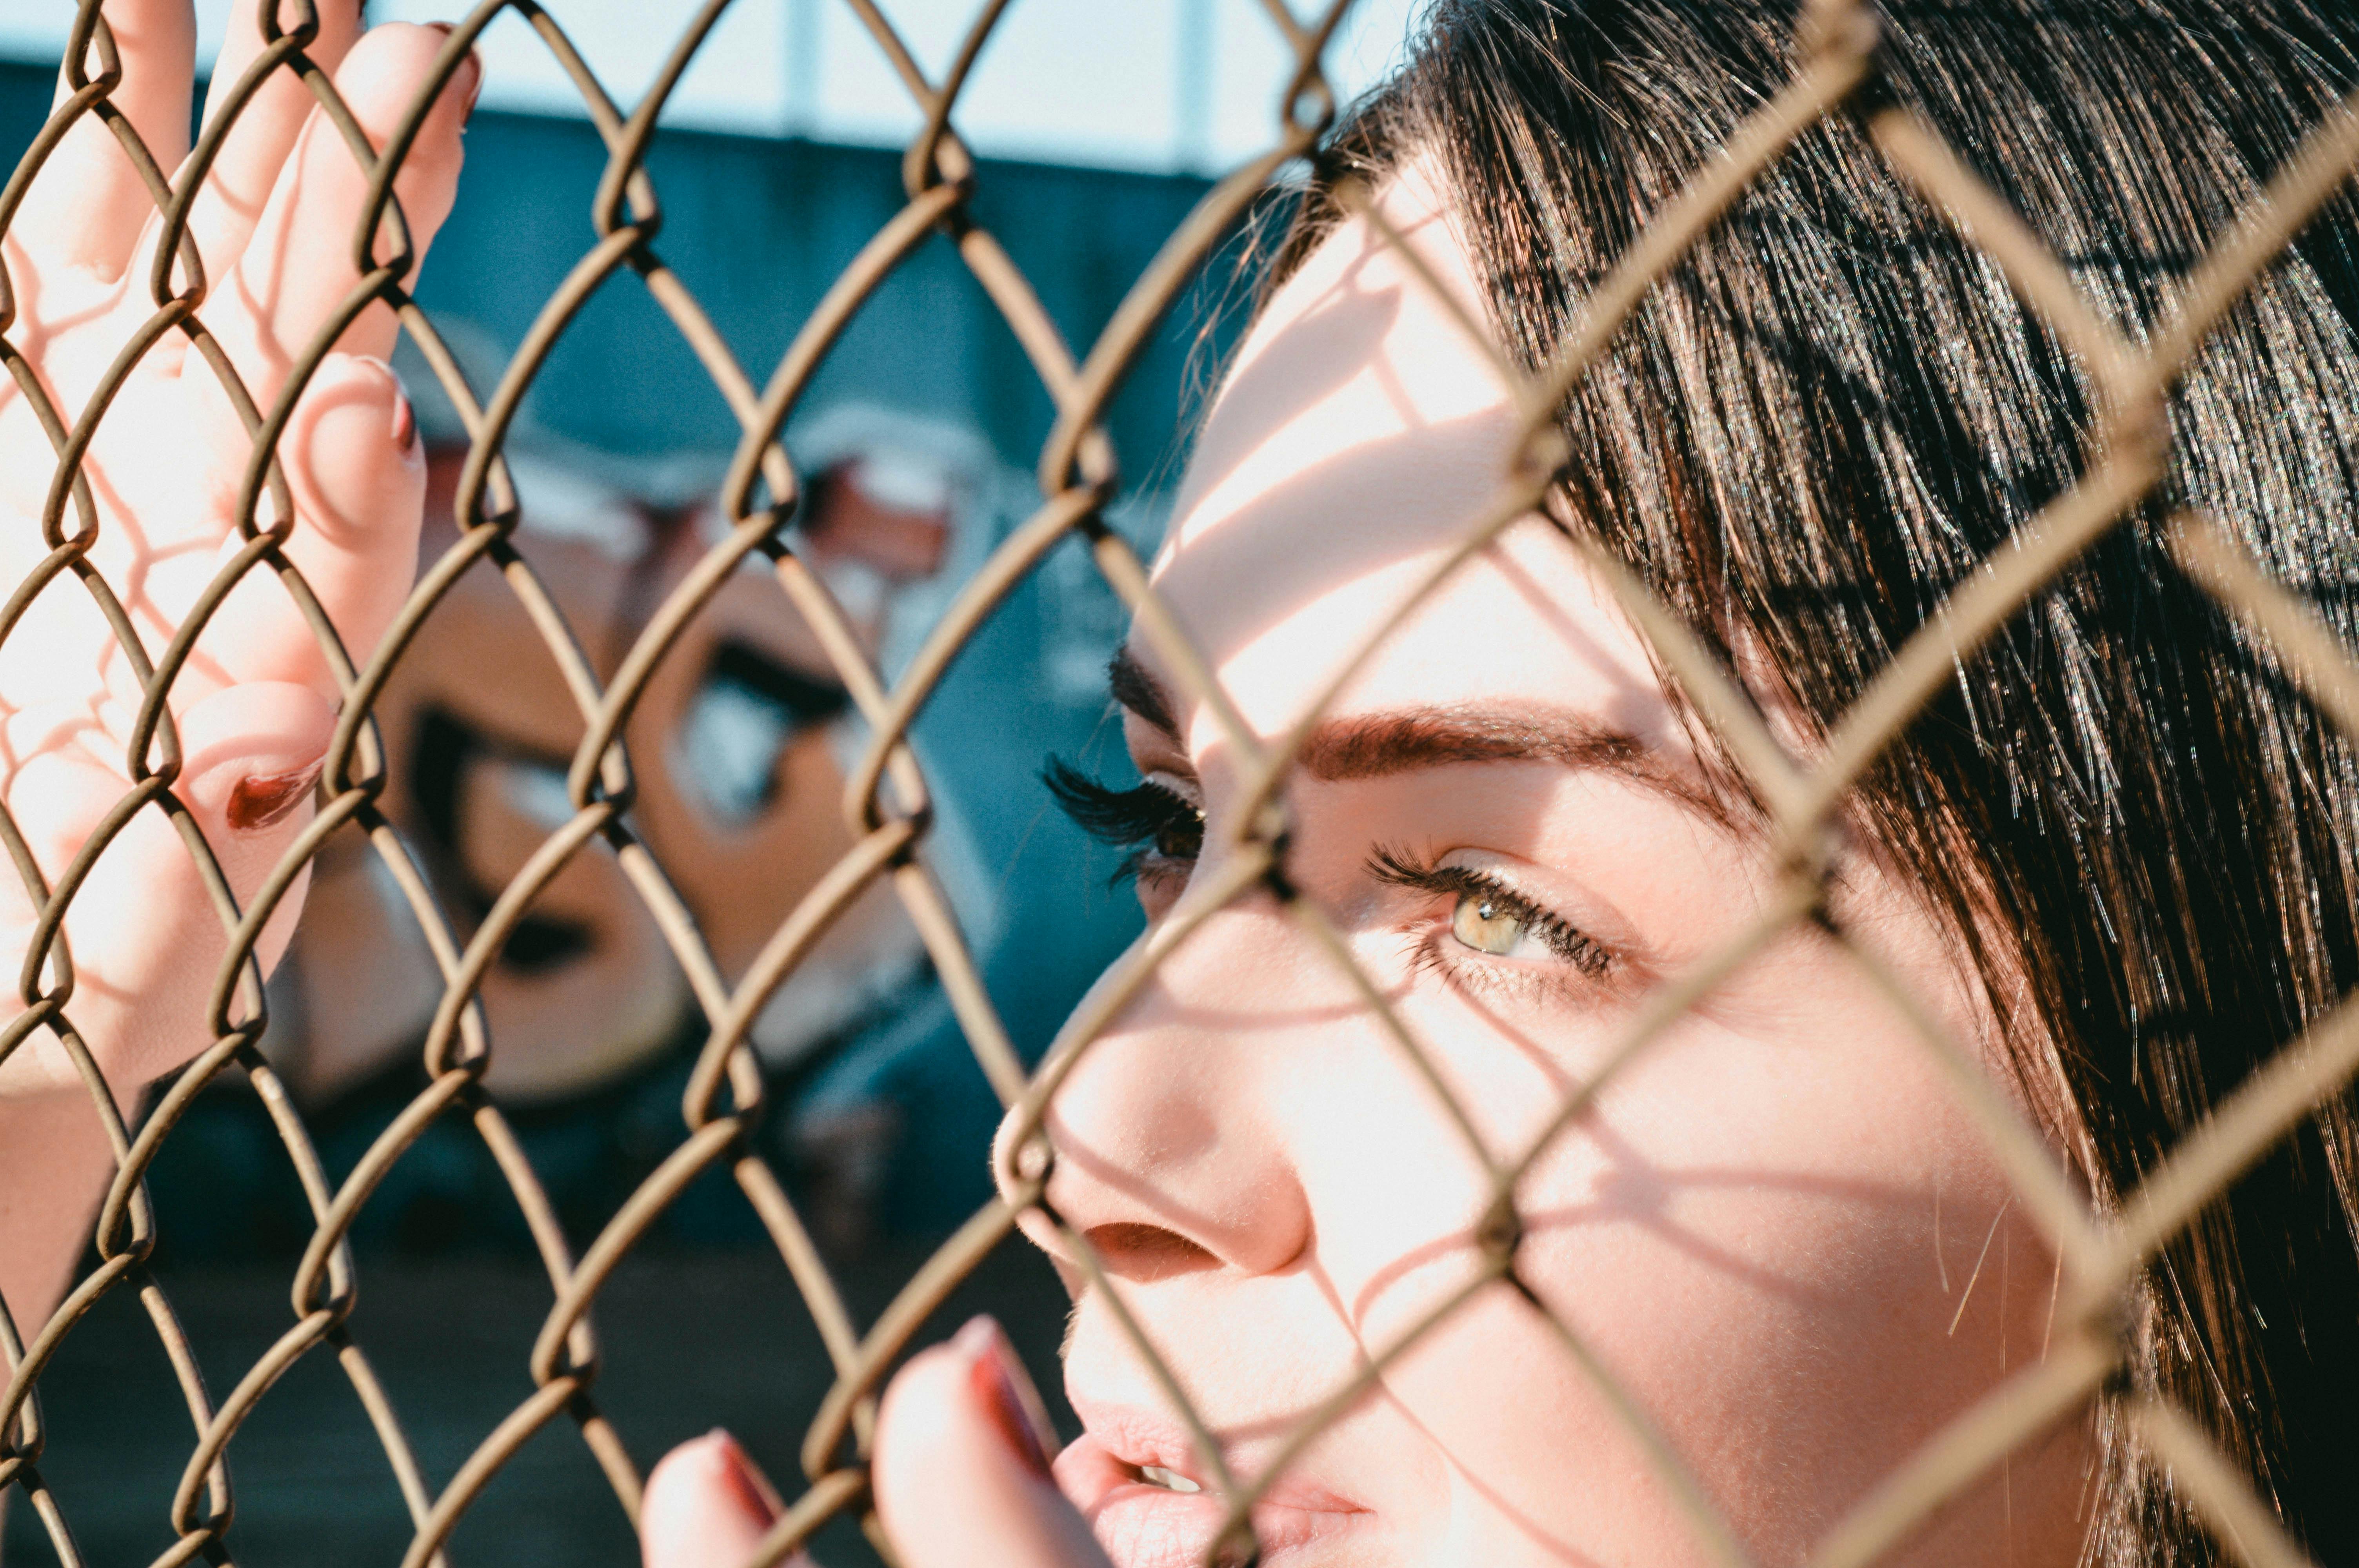 woman leaning on chain link fence